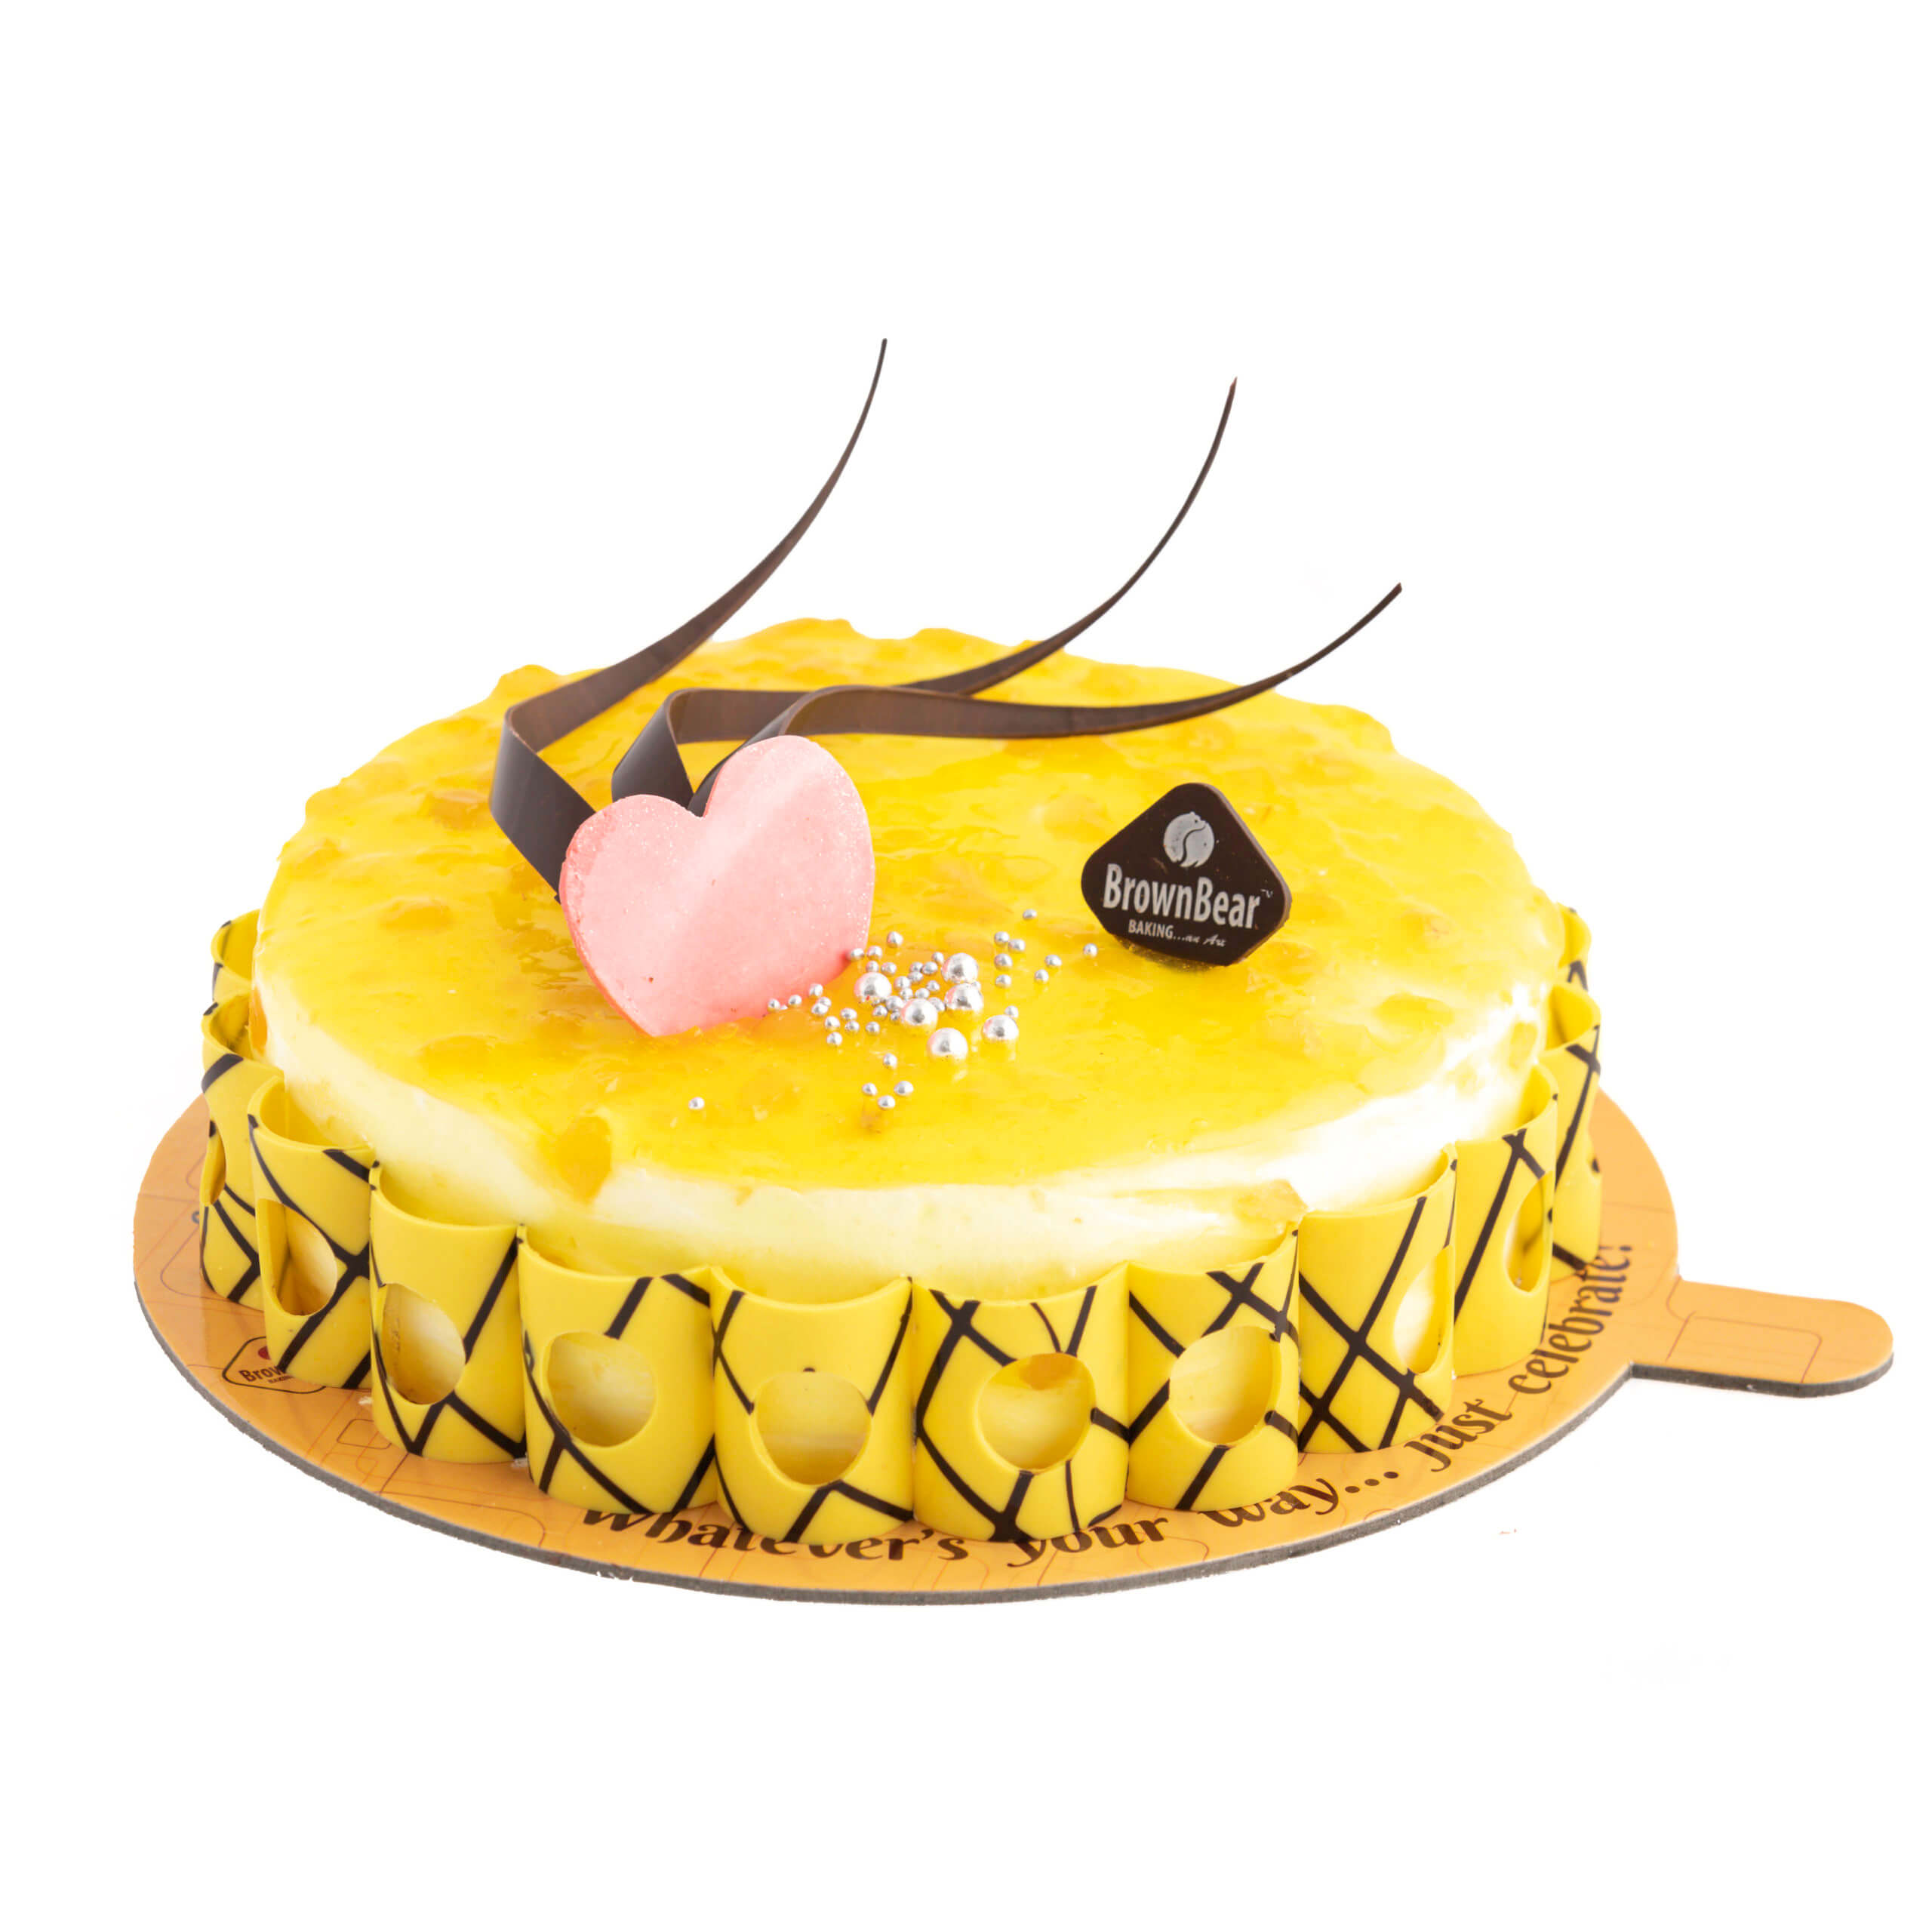 Traditional pineapple Vanilla 1 Kg birthday cake by CakeSquare |Online Cake  Delivery | Midnight Cake delivery - Cake Square Chennai | Cake Shop in  Chennai